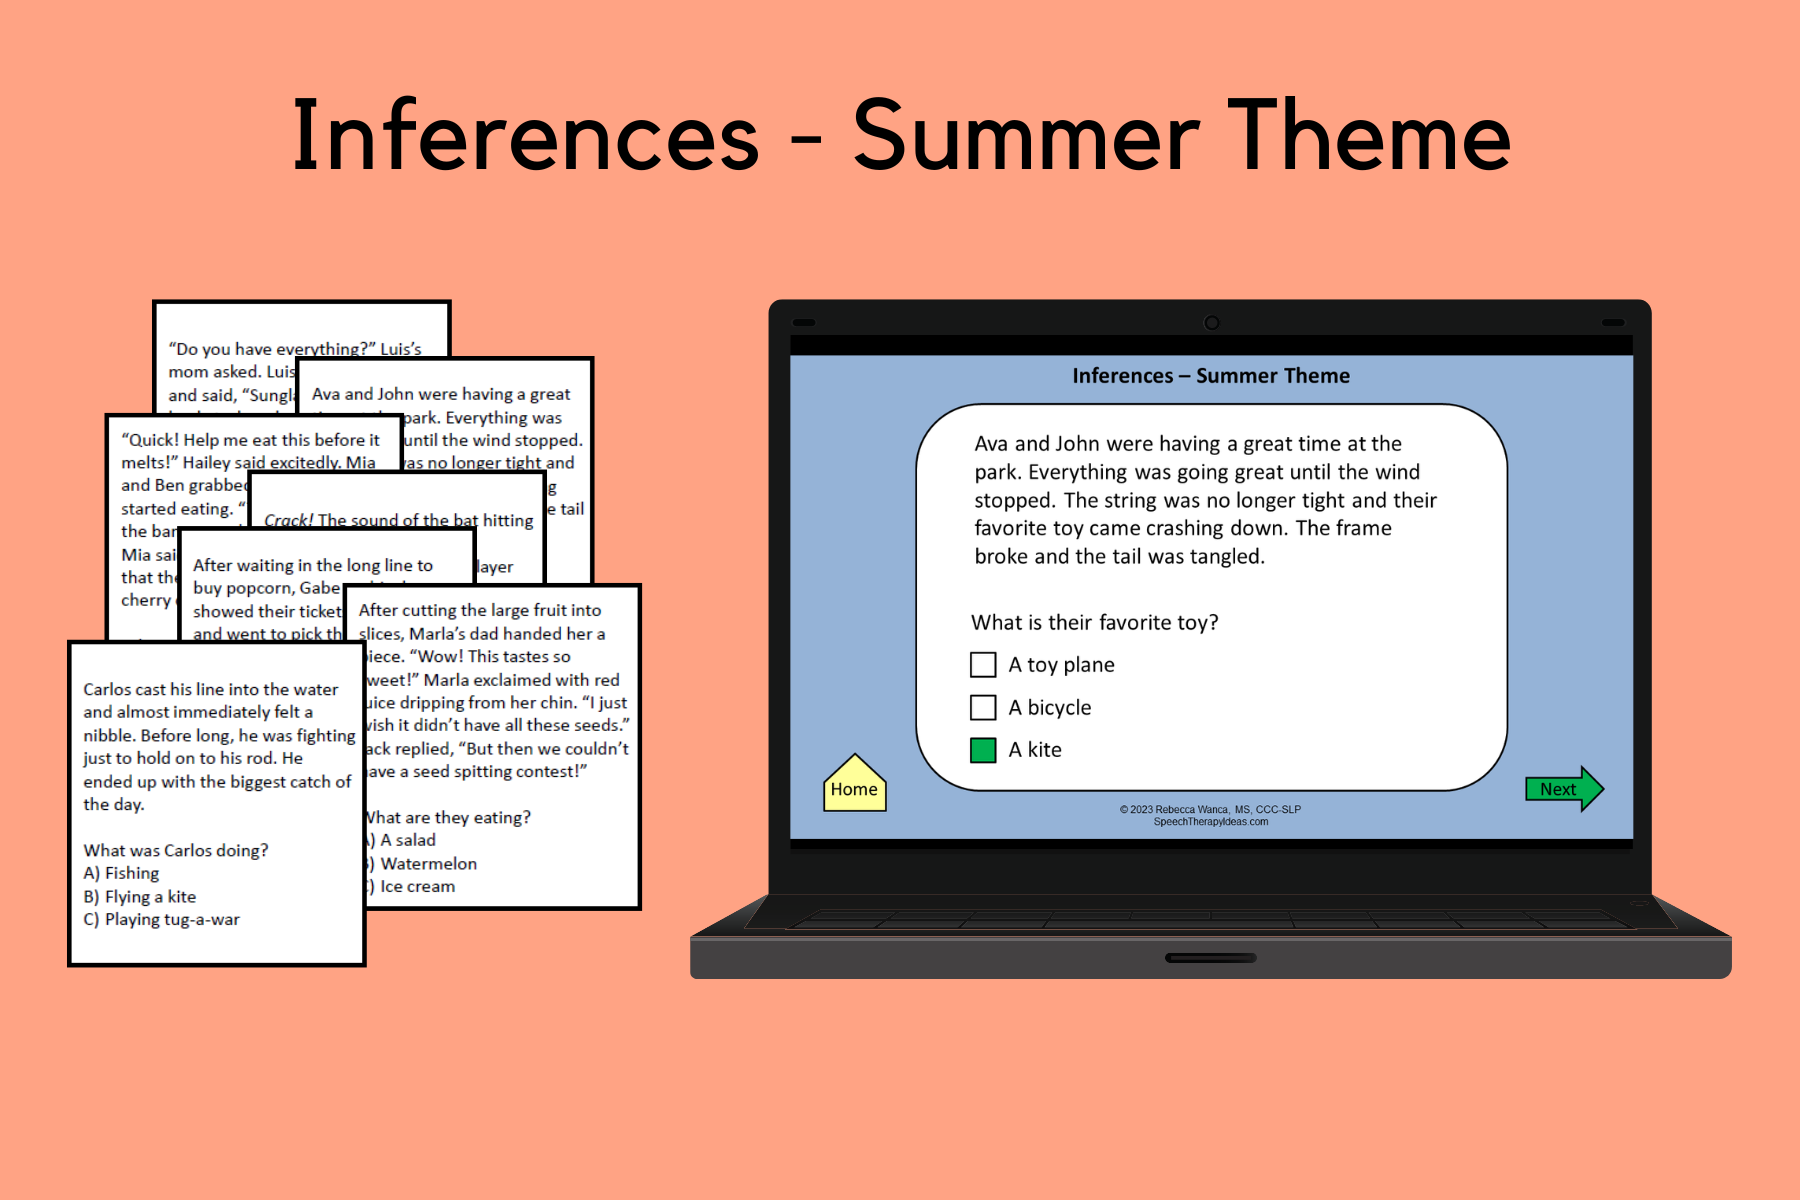 Inferences – Summer Theme